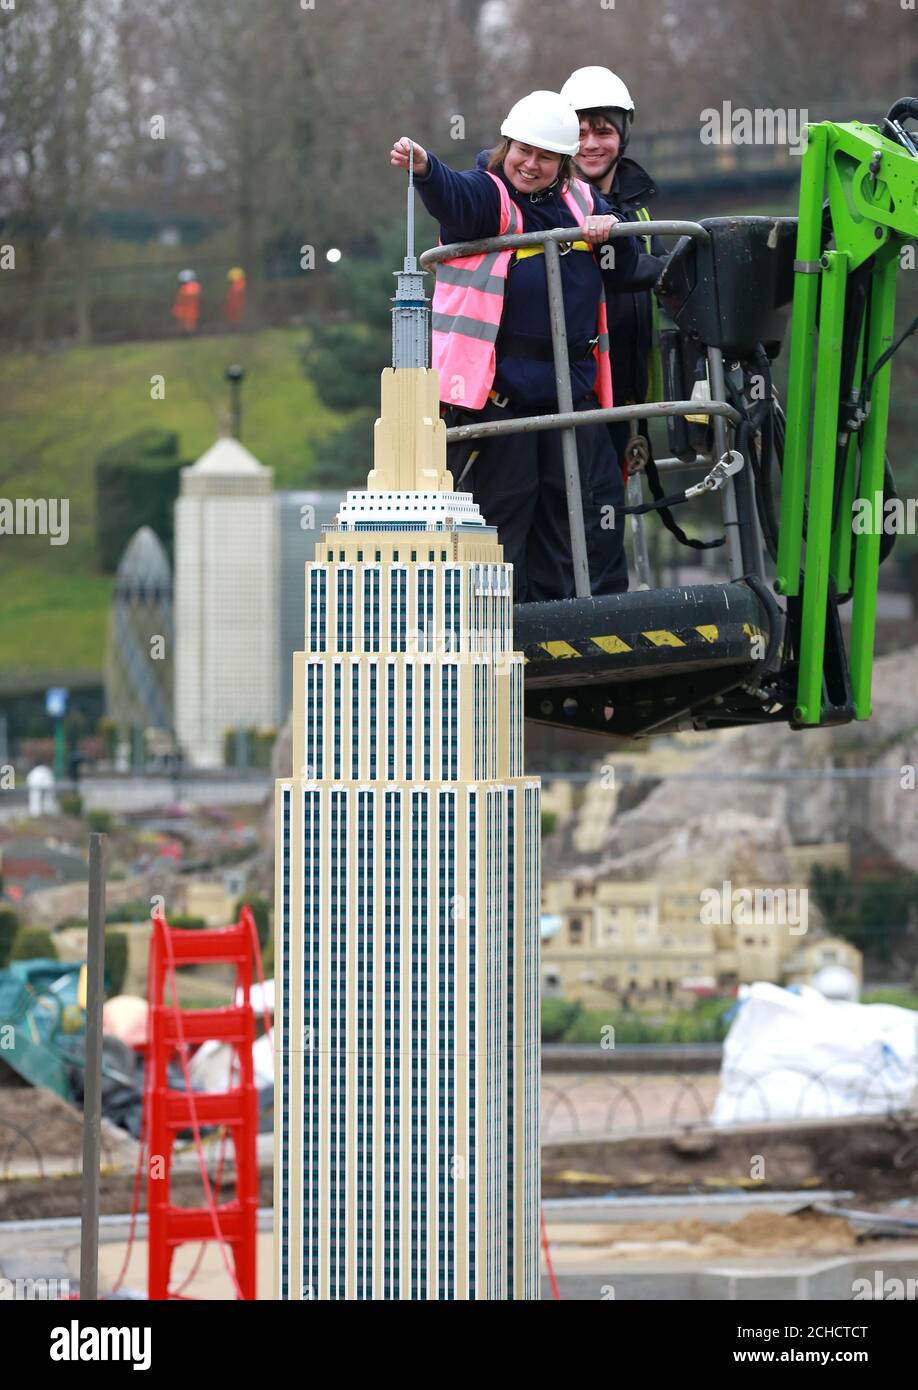 EDITORIAL USE ONLY Model makers Paula Laughton and Tim McPhee put the  finishing touches to a new LEGO Empire State Building, which has 71,040  bricks and took 700 hours to build, at